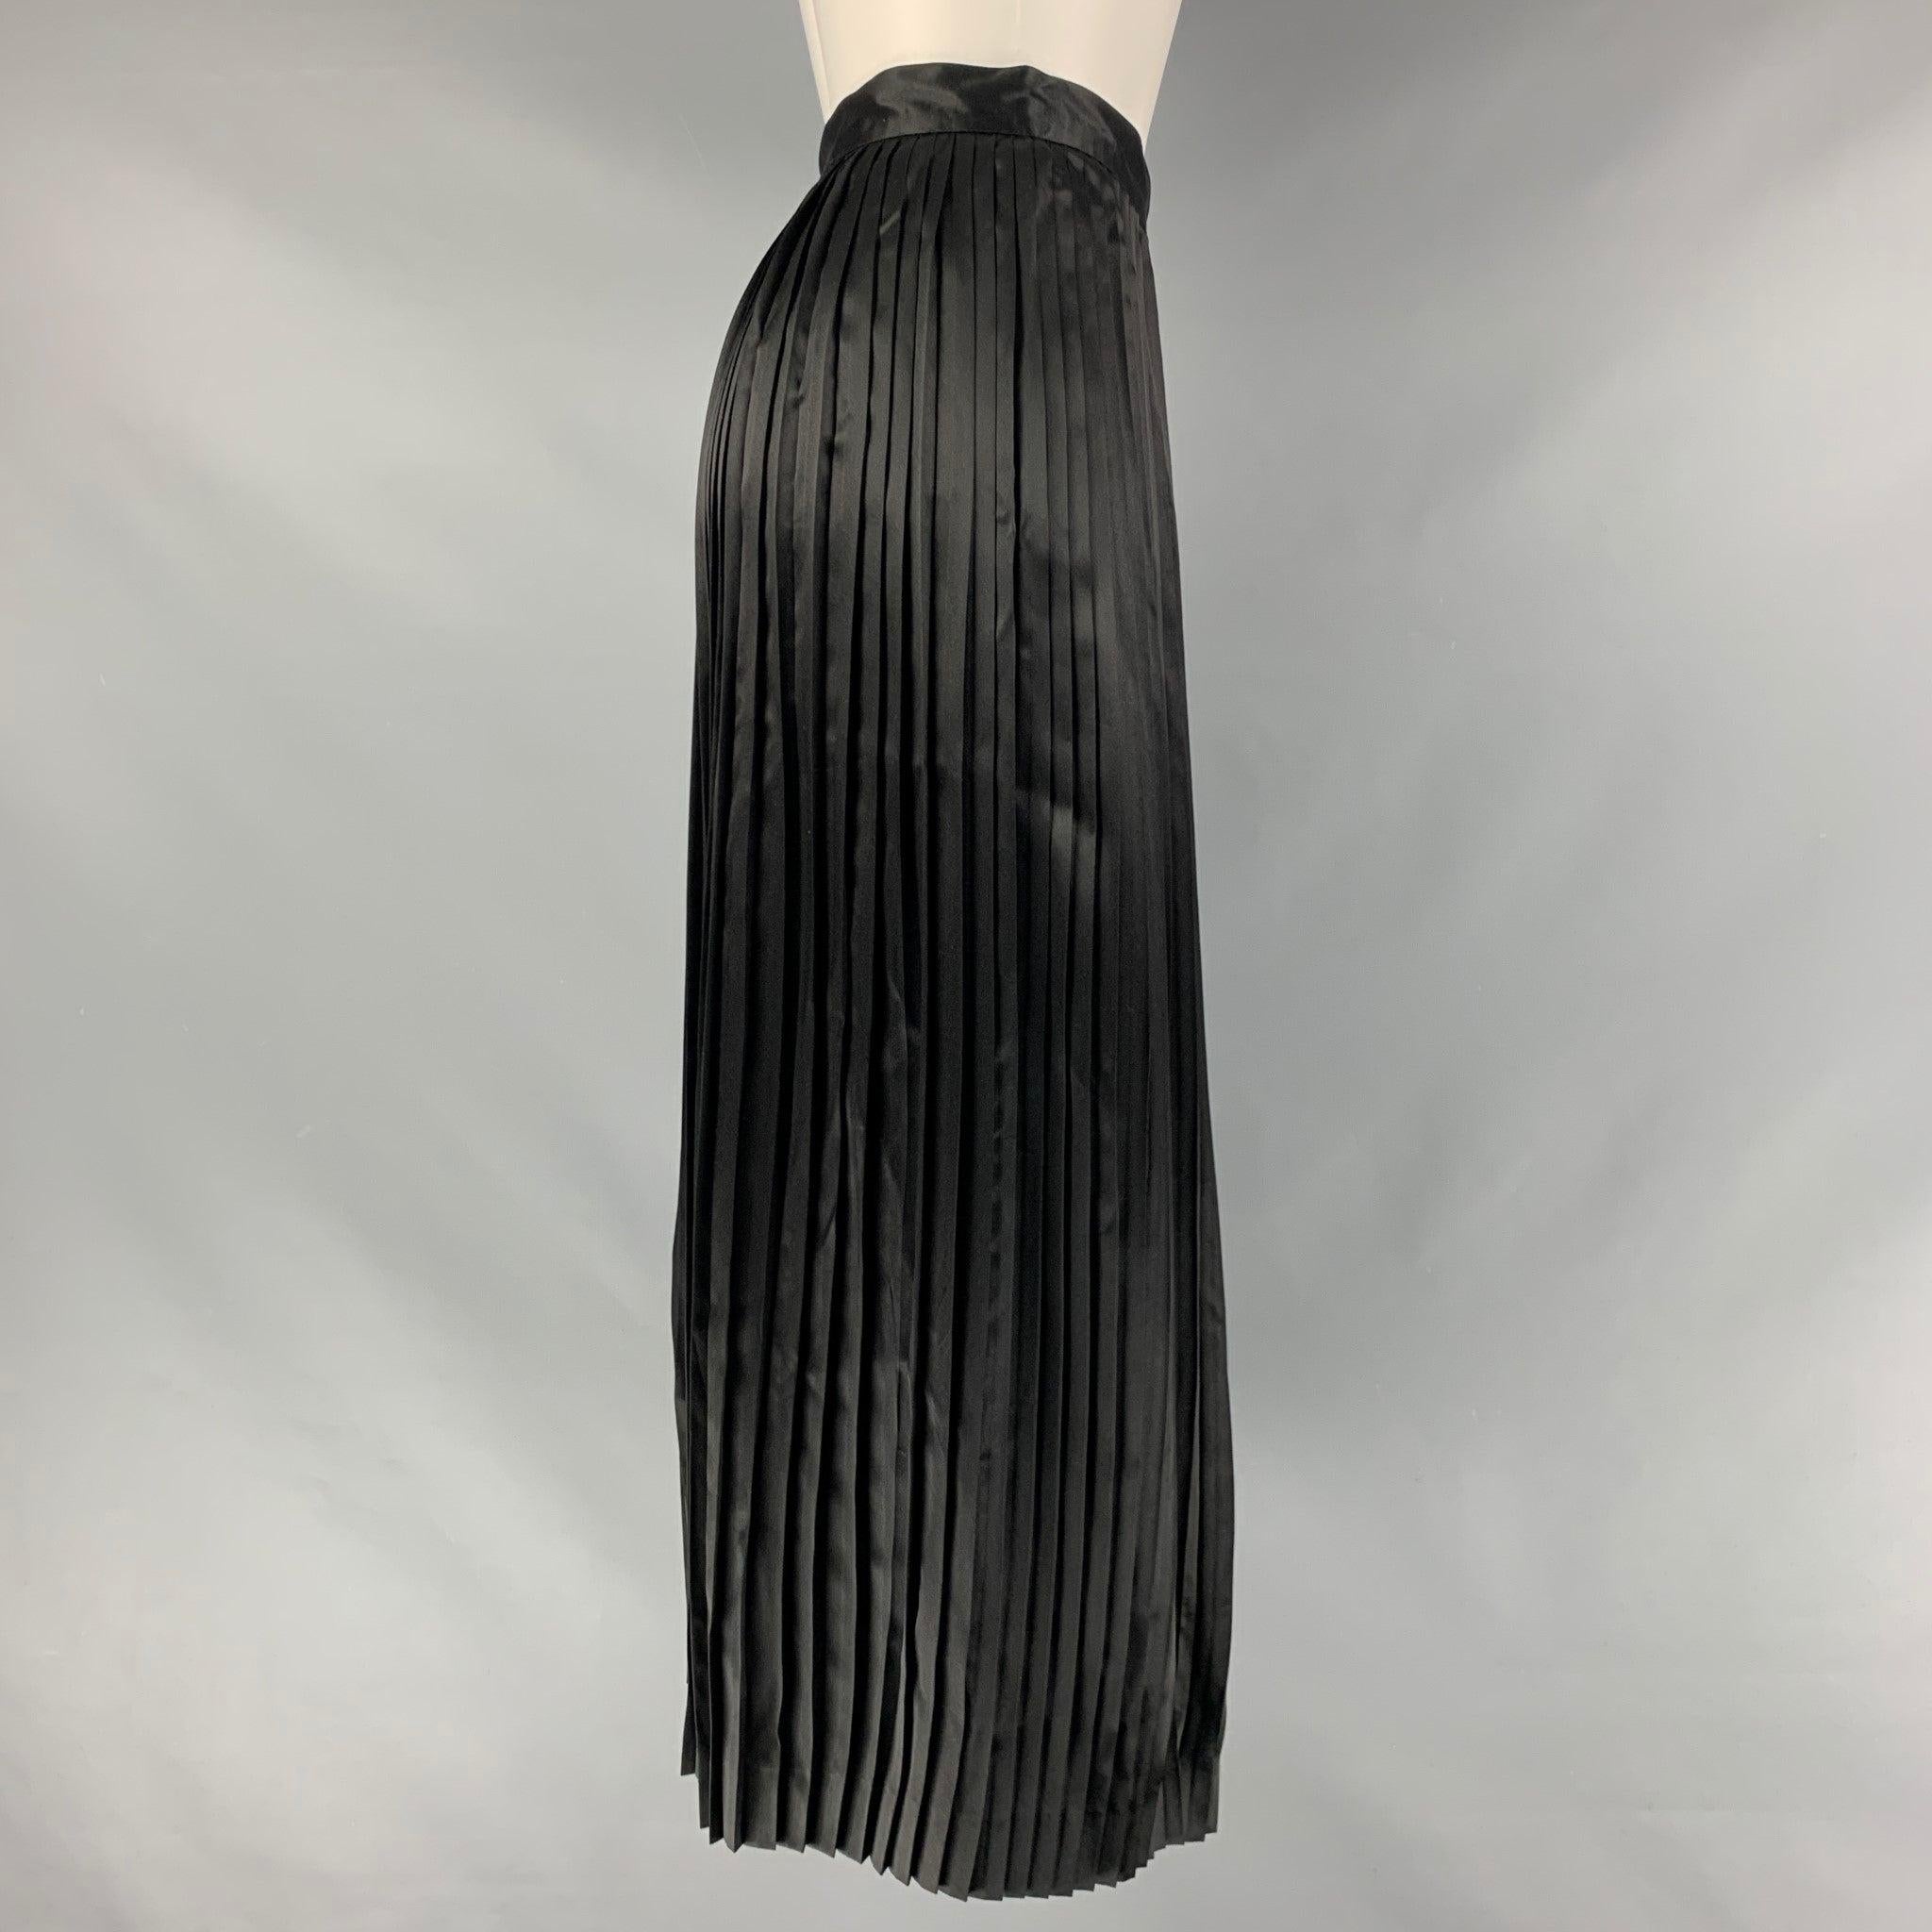 CHRISTIAN DIOR Mid-Calf skirt comes in a black silk material featuring a pleated style and an seam side zip up closure. Made in France.Excellent Pre-Owned Condition. 

Marked:   4 

Measurements: 
  Waist: 26 inches Hip: 50 inches Length: 33 inches 